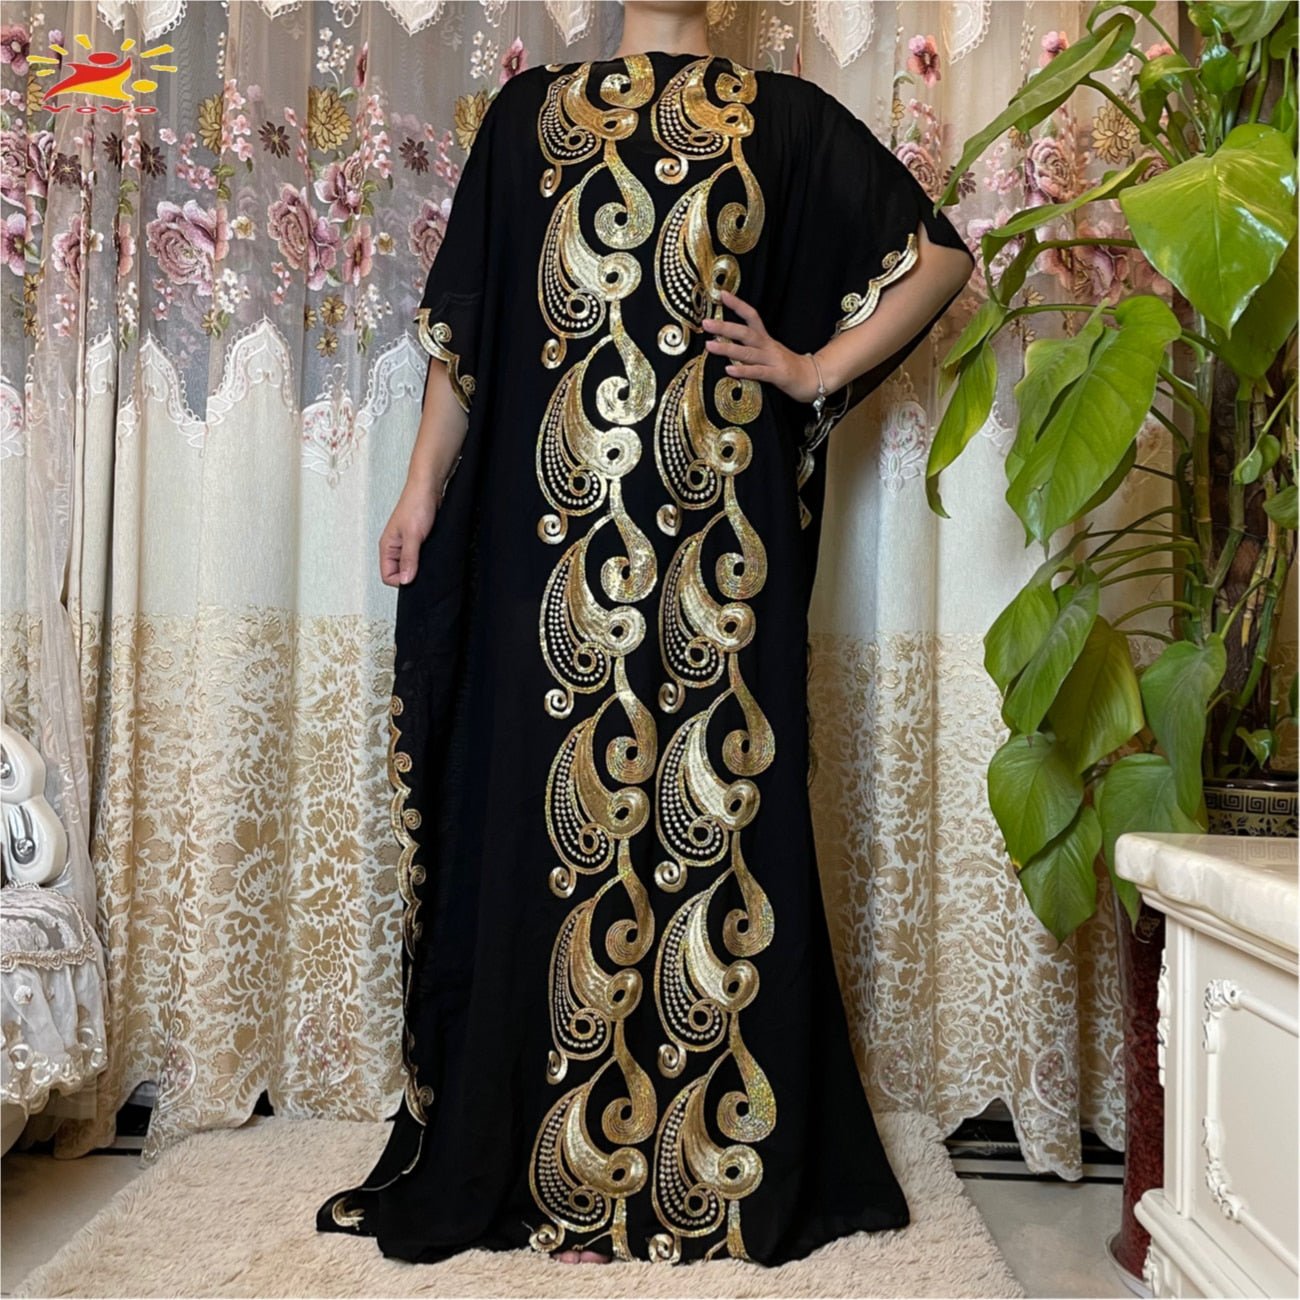 Stunning African Embroidery Flower Dress for Women - Muslim Sequin Embroidery and Scarf Included - Flexi Africa FREE POST